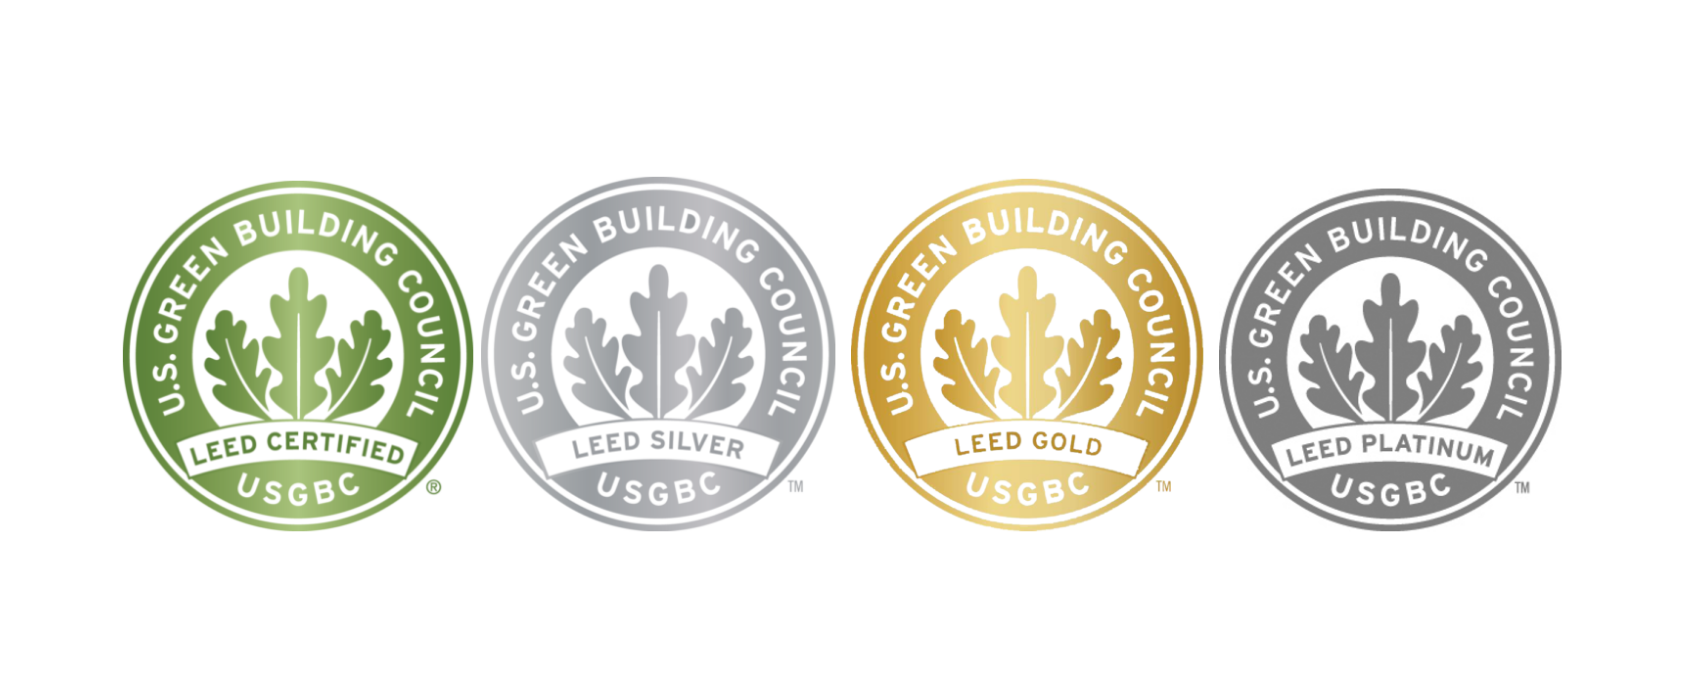 What It Means to Get "LEED Certification" -